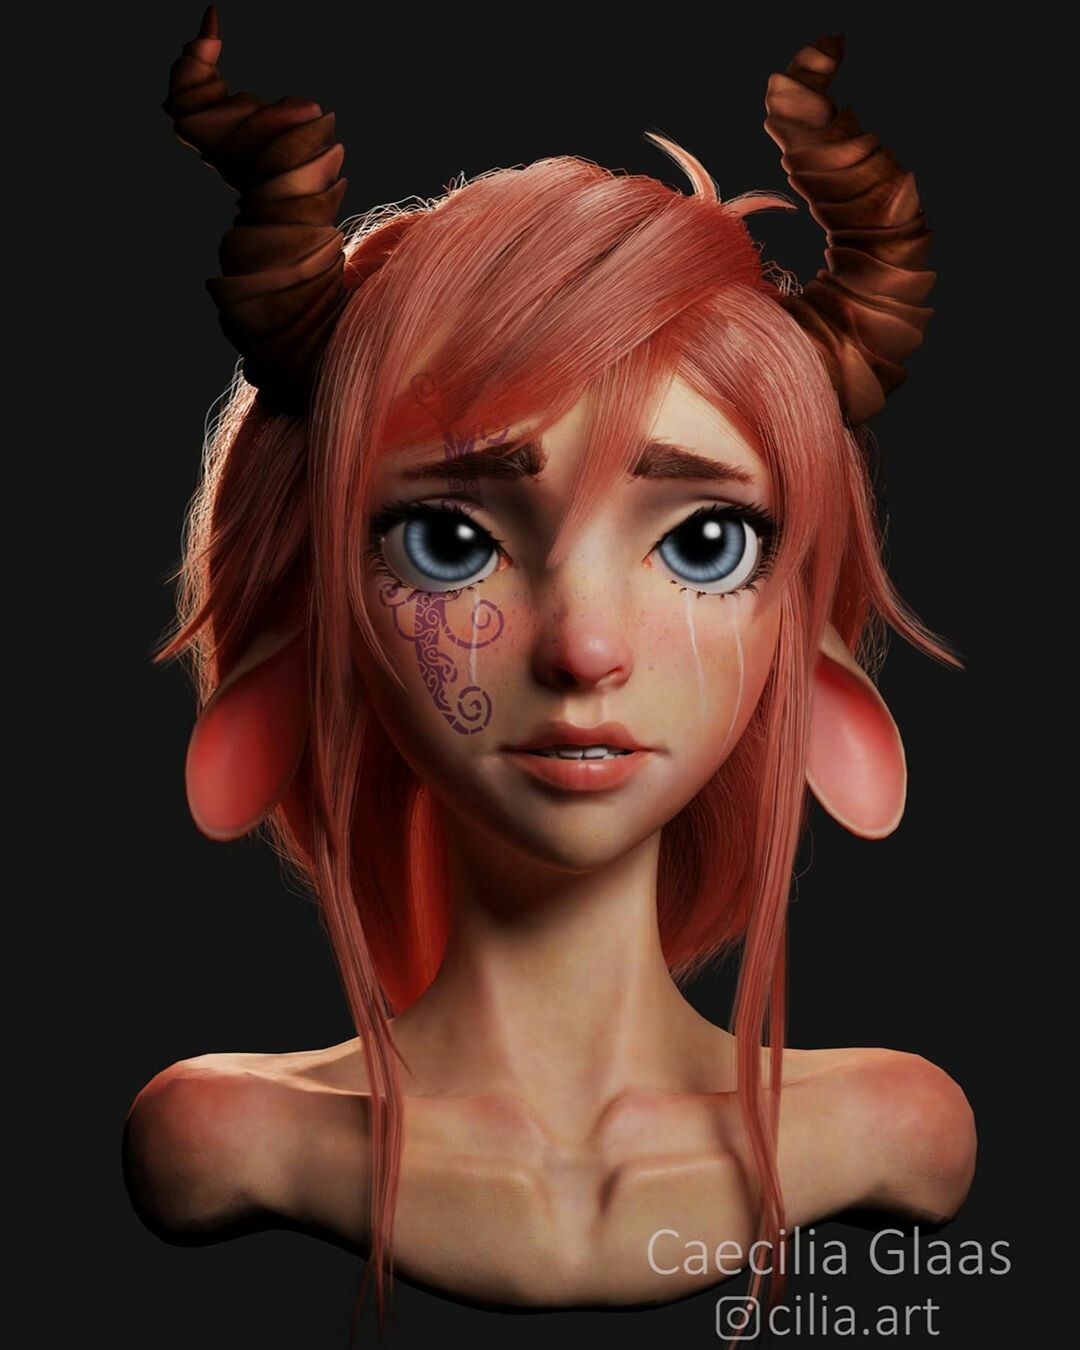 Fanart - 3D model created by Caecilia Glaas